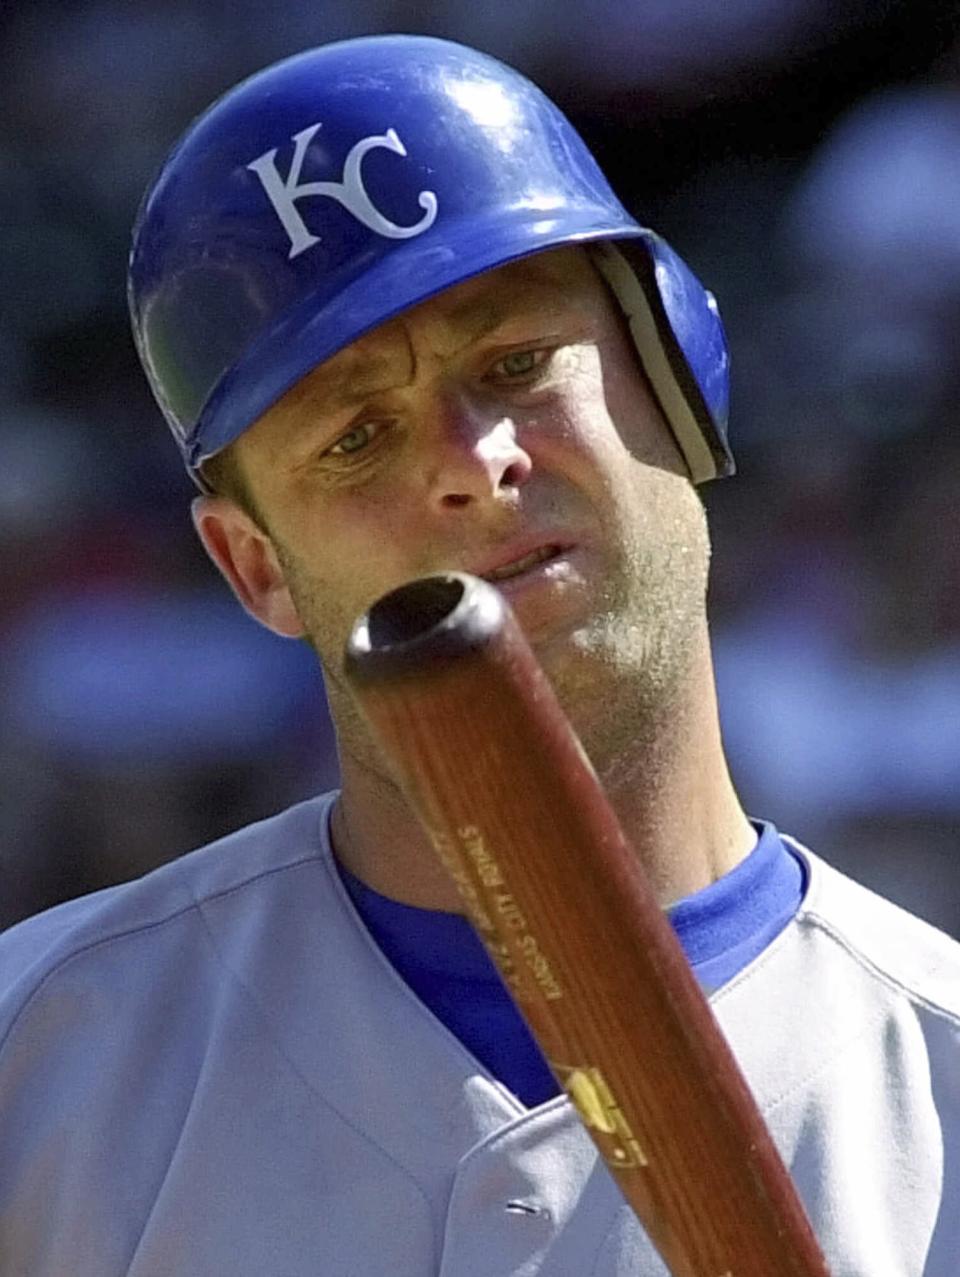 FILE - Kansas City Royals batter Dave McCarty inspects his bat after hitting a foul ball during the seventh inning against the Texas Rangers in a baseball game in Arlington, Texas, May 31, 2001. McCarty, a member of the Boston Red Sox championship team in 2004 who played with seven MLB teams in an 11-year career, has died. He was 54. The Red Sox announced McCarty's death in a statement, saying the former first baseman and outfielder died Friday, April 19, 2024, after suffering a cardiac event in Oakland, Calif. (AP Photo/Bill Janscha, File)